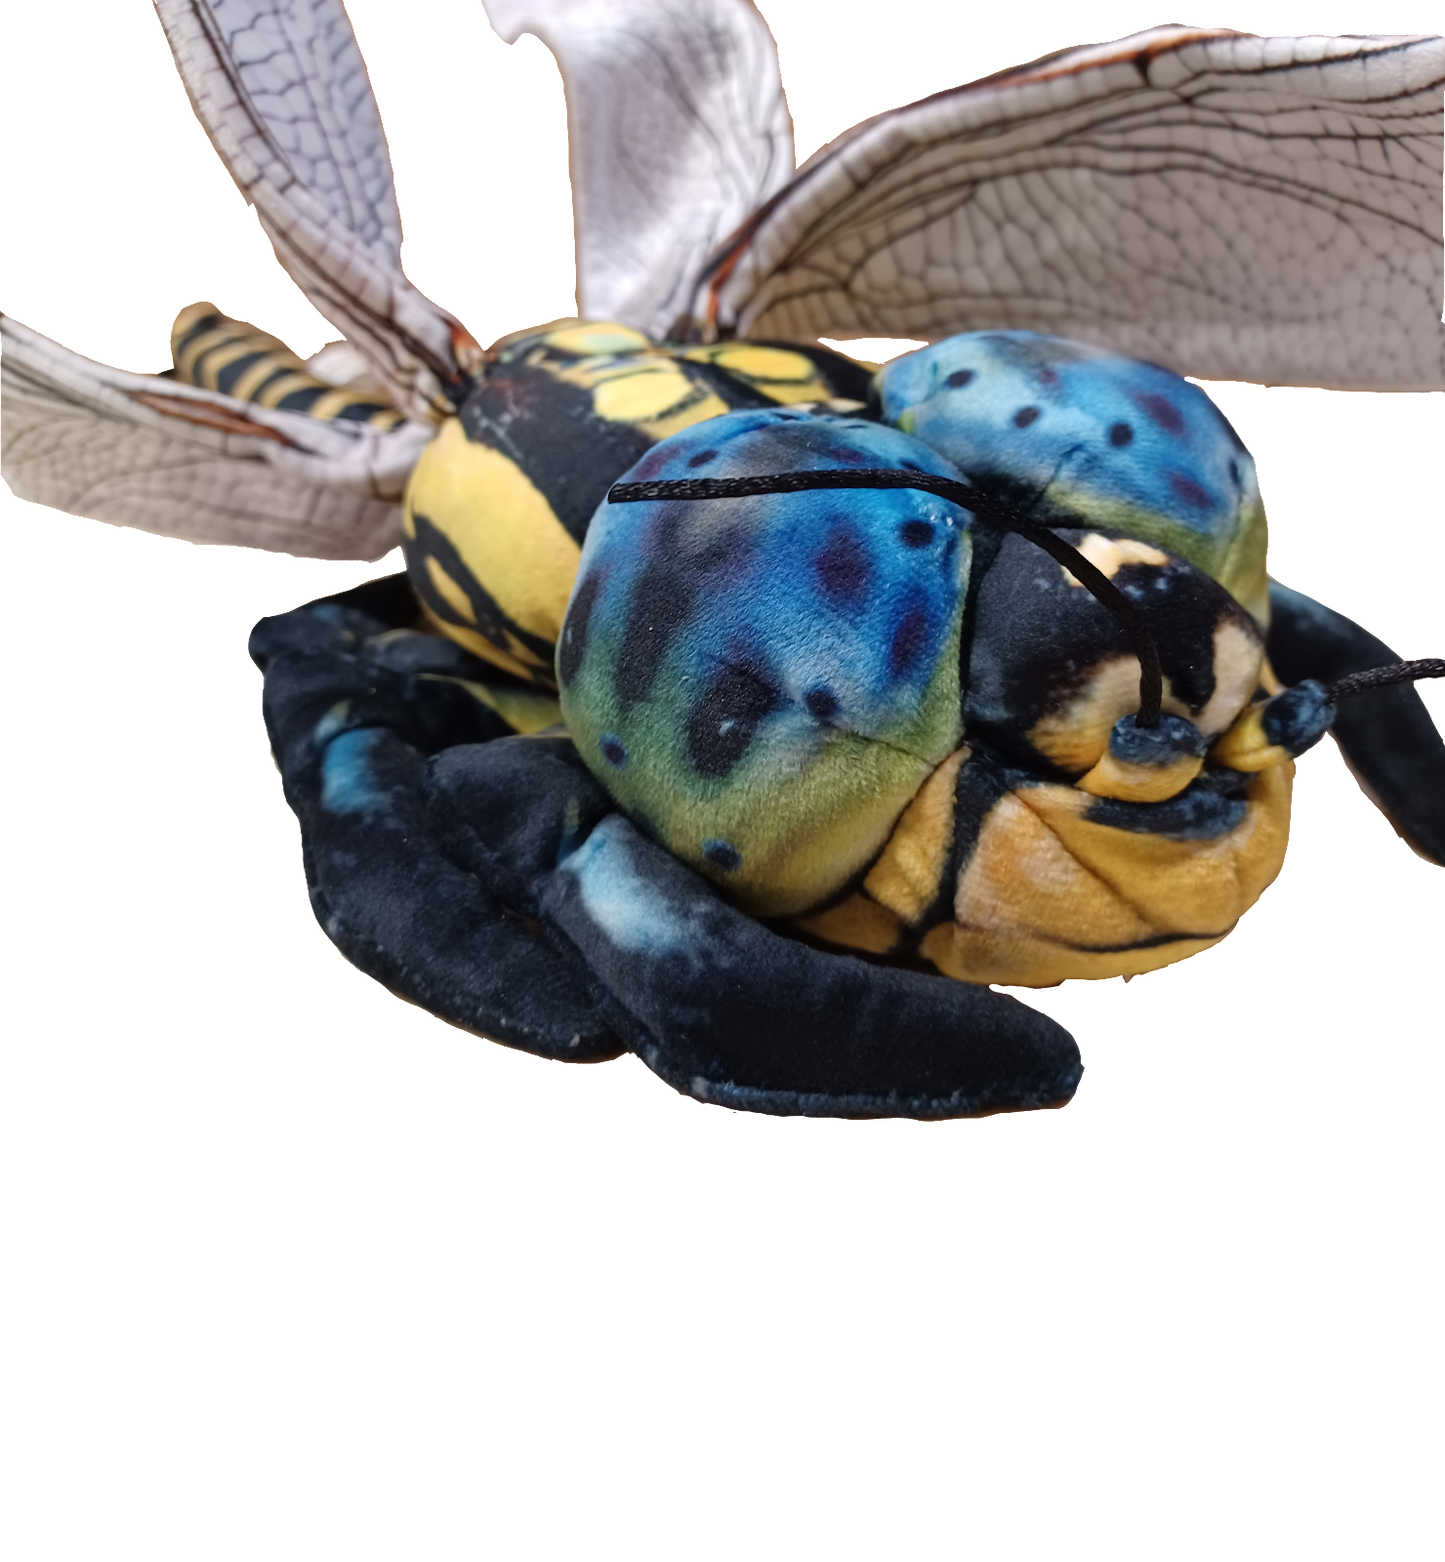 Dragonfly 21.65" Plush Stuffed Animal Insect